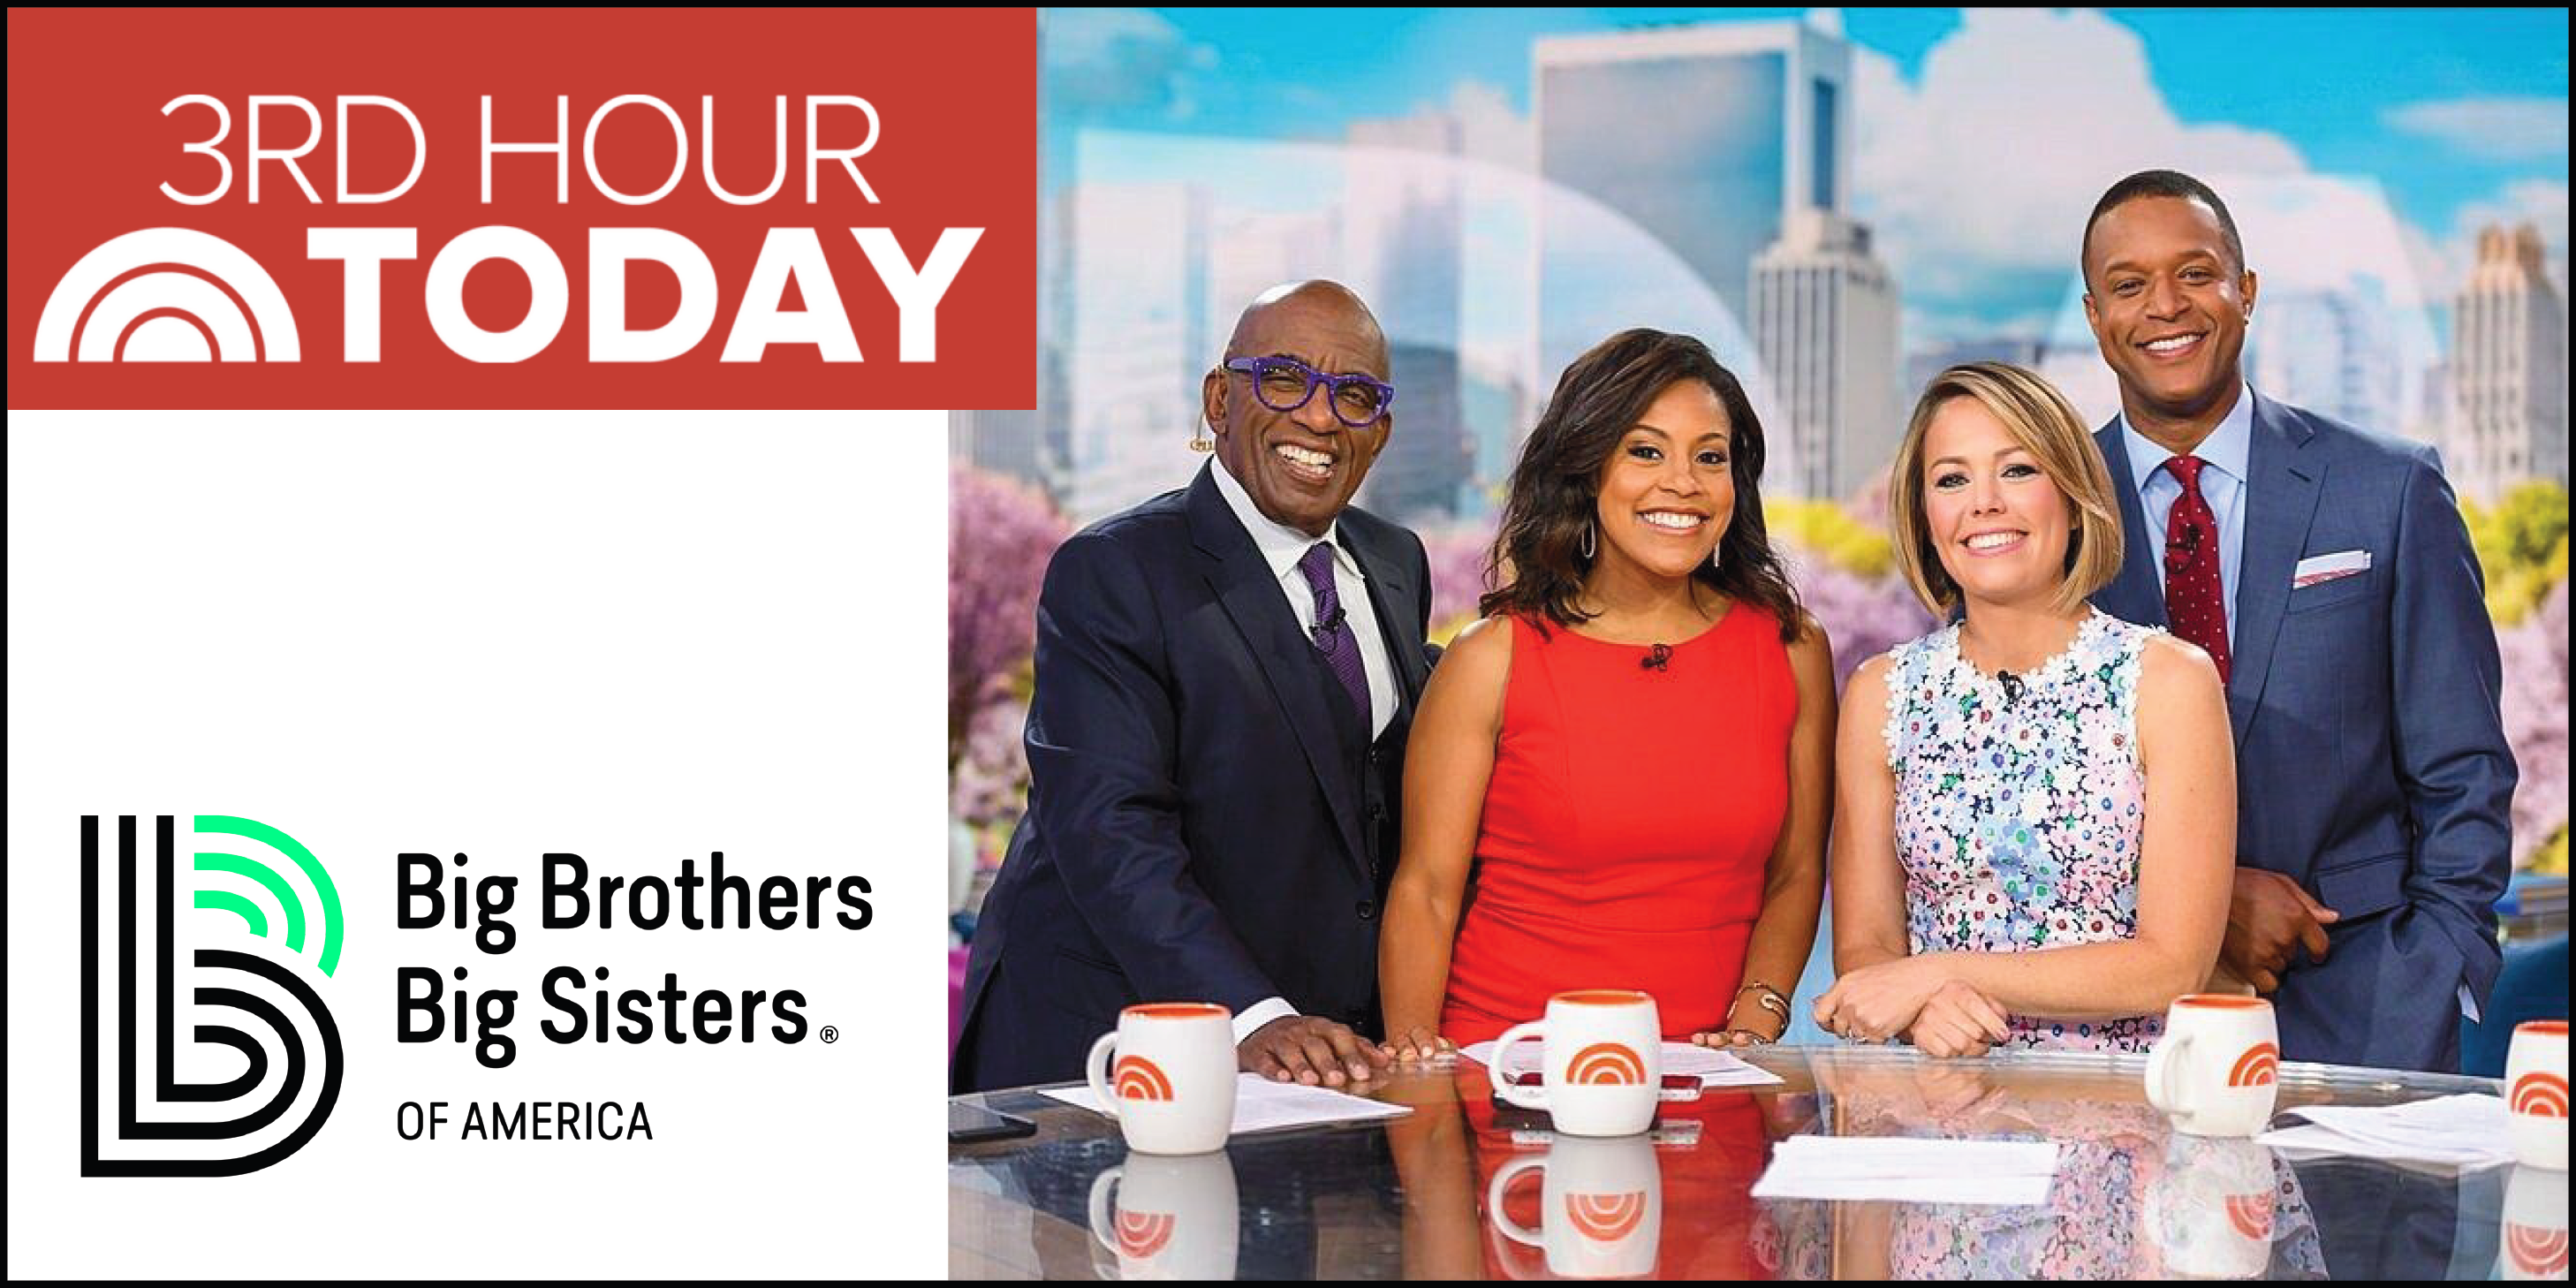 Big Brothers Big Sisters Featured on TODAY Show - Big Brothers Big